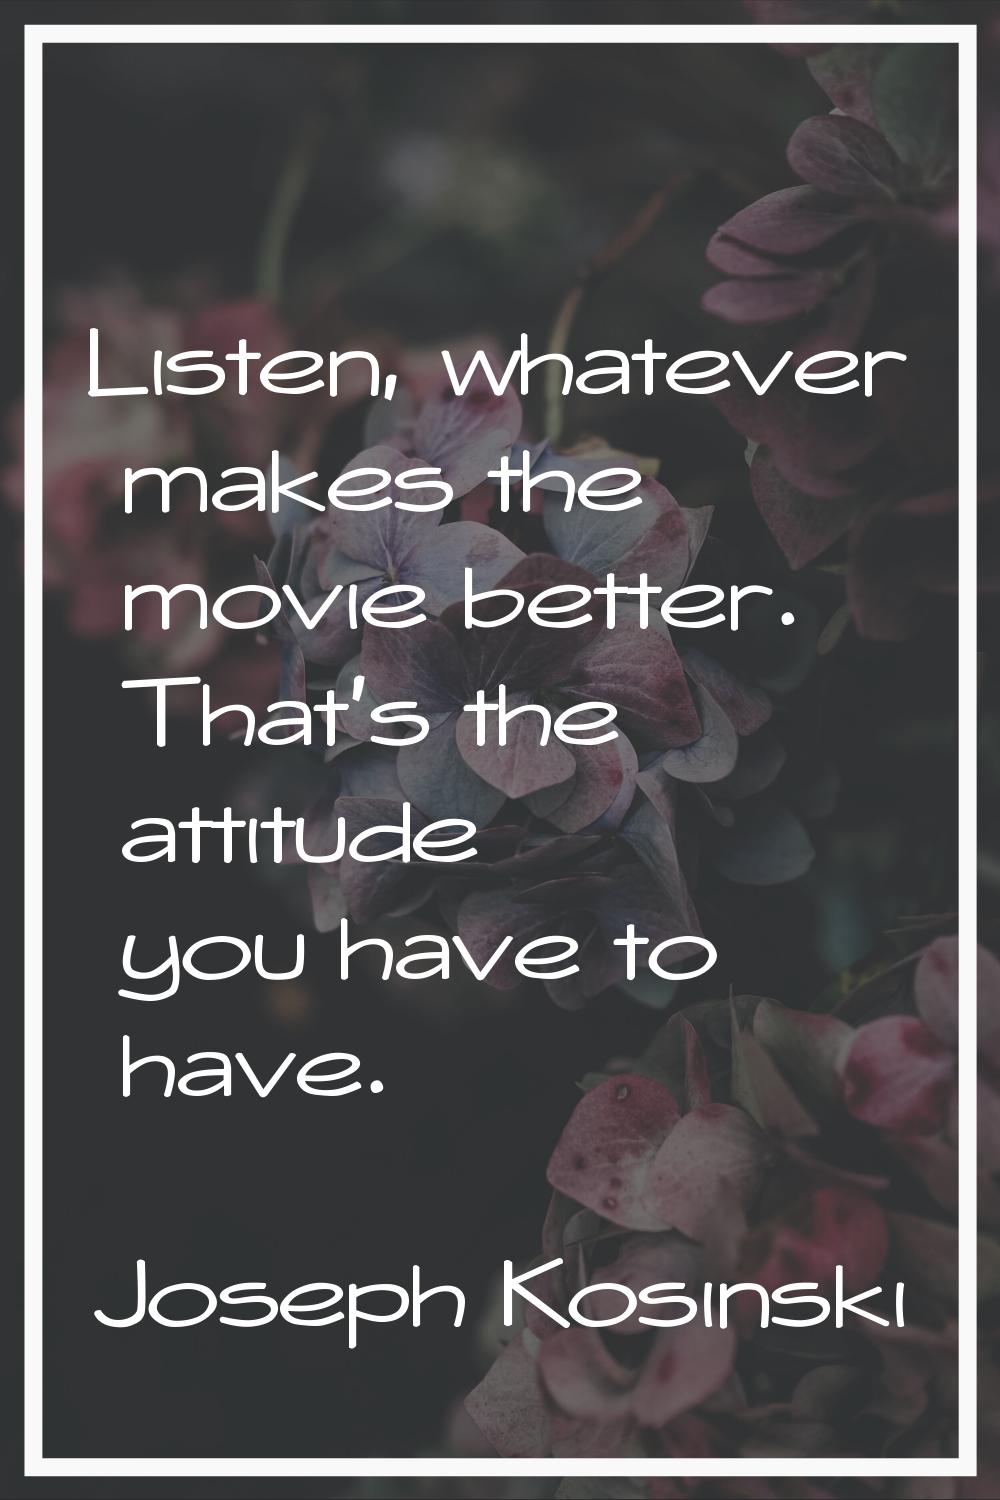 Listen, whatever makes the movie better. That's the attitude you have to have.